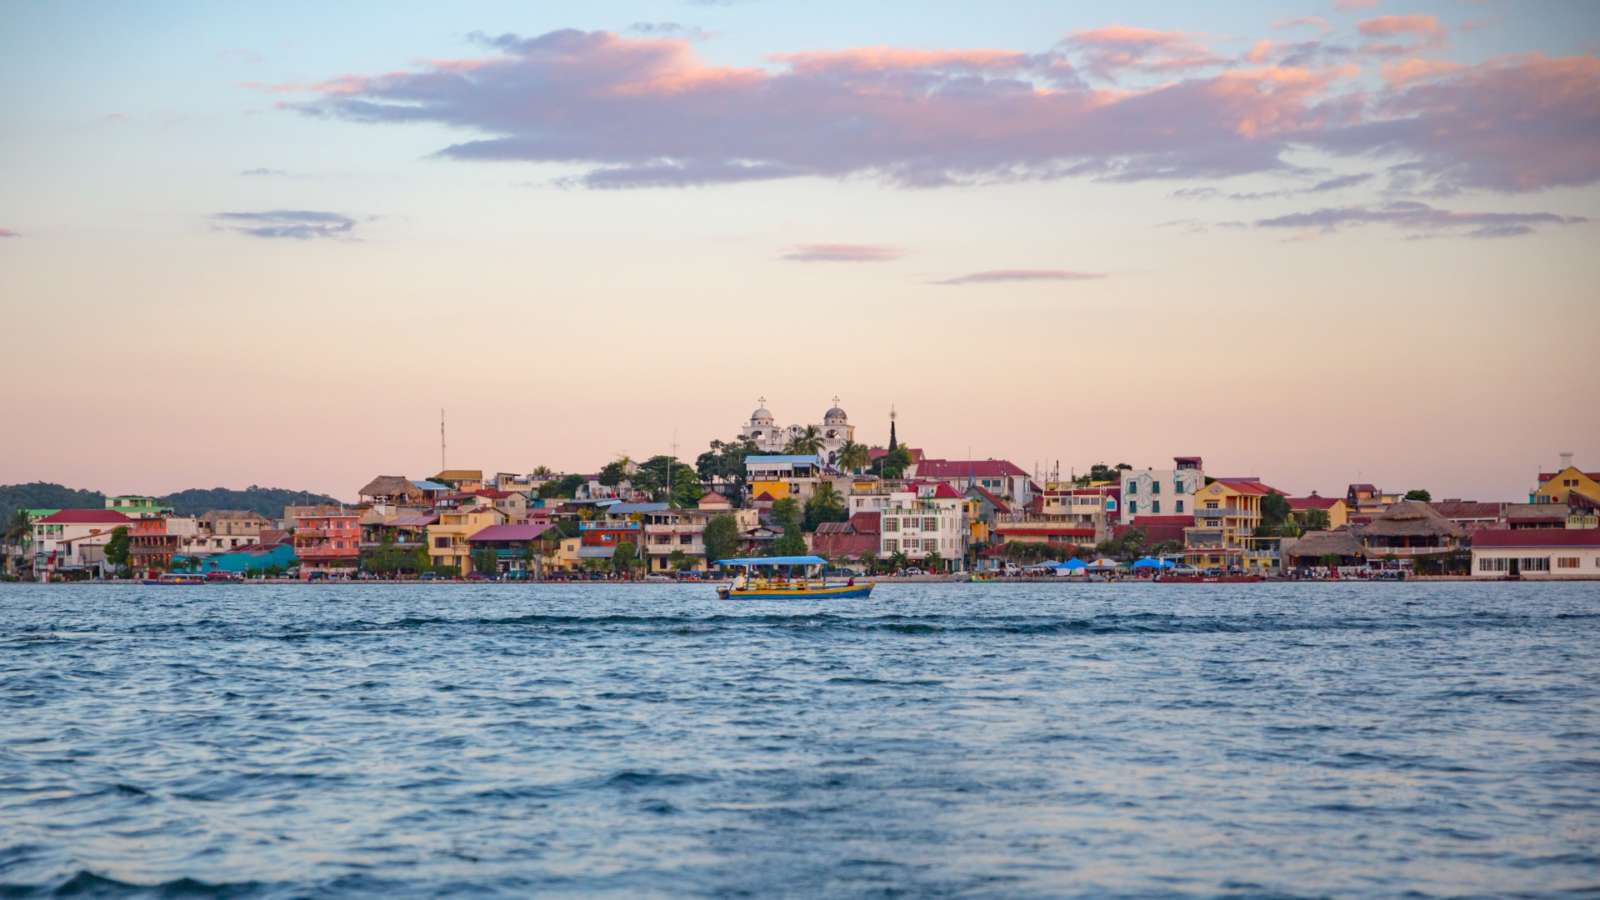 View of Flores, Guatemala from Lake Peten